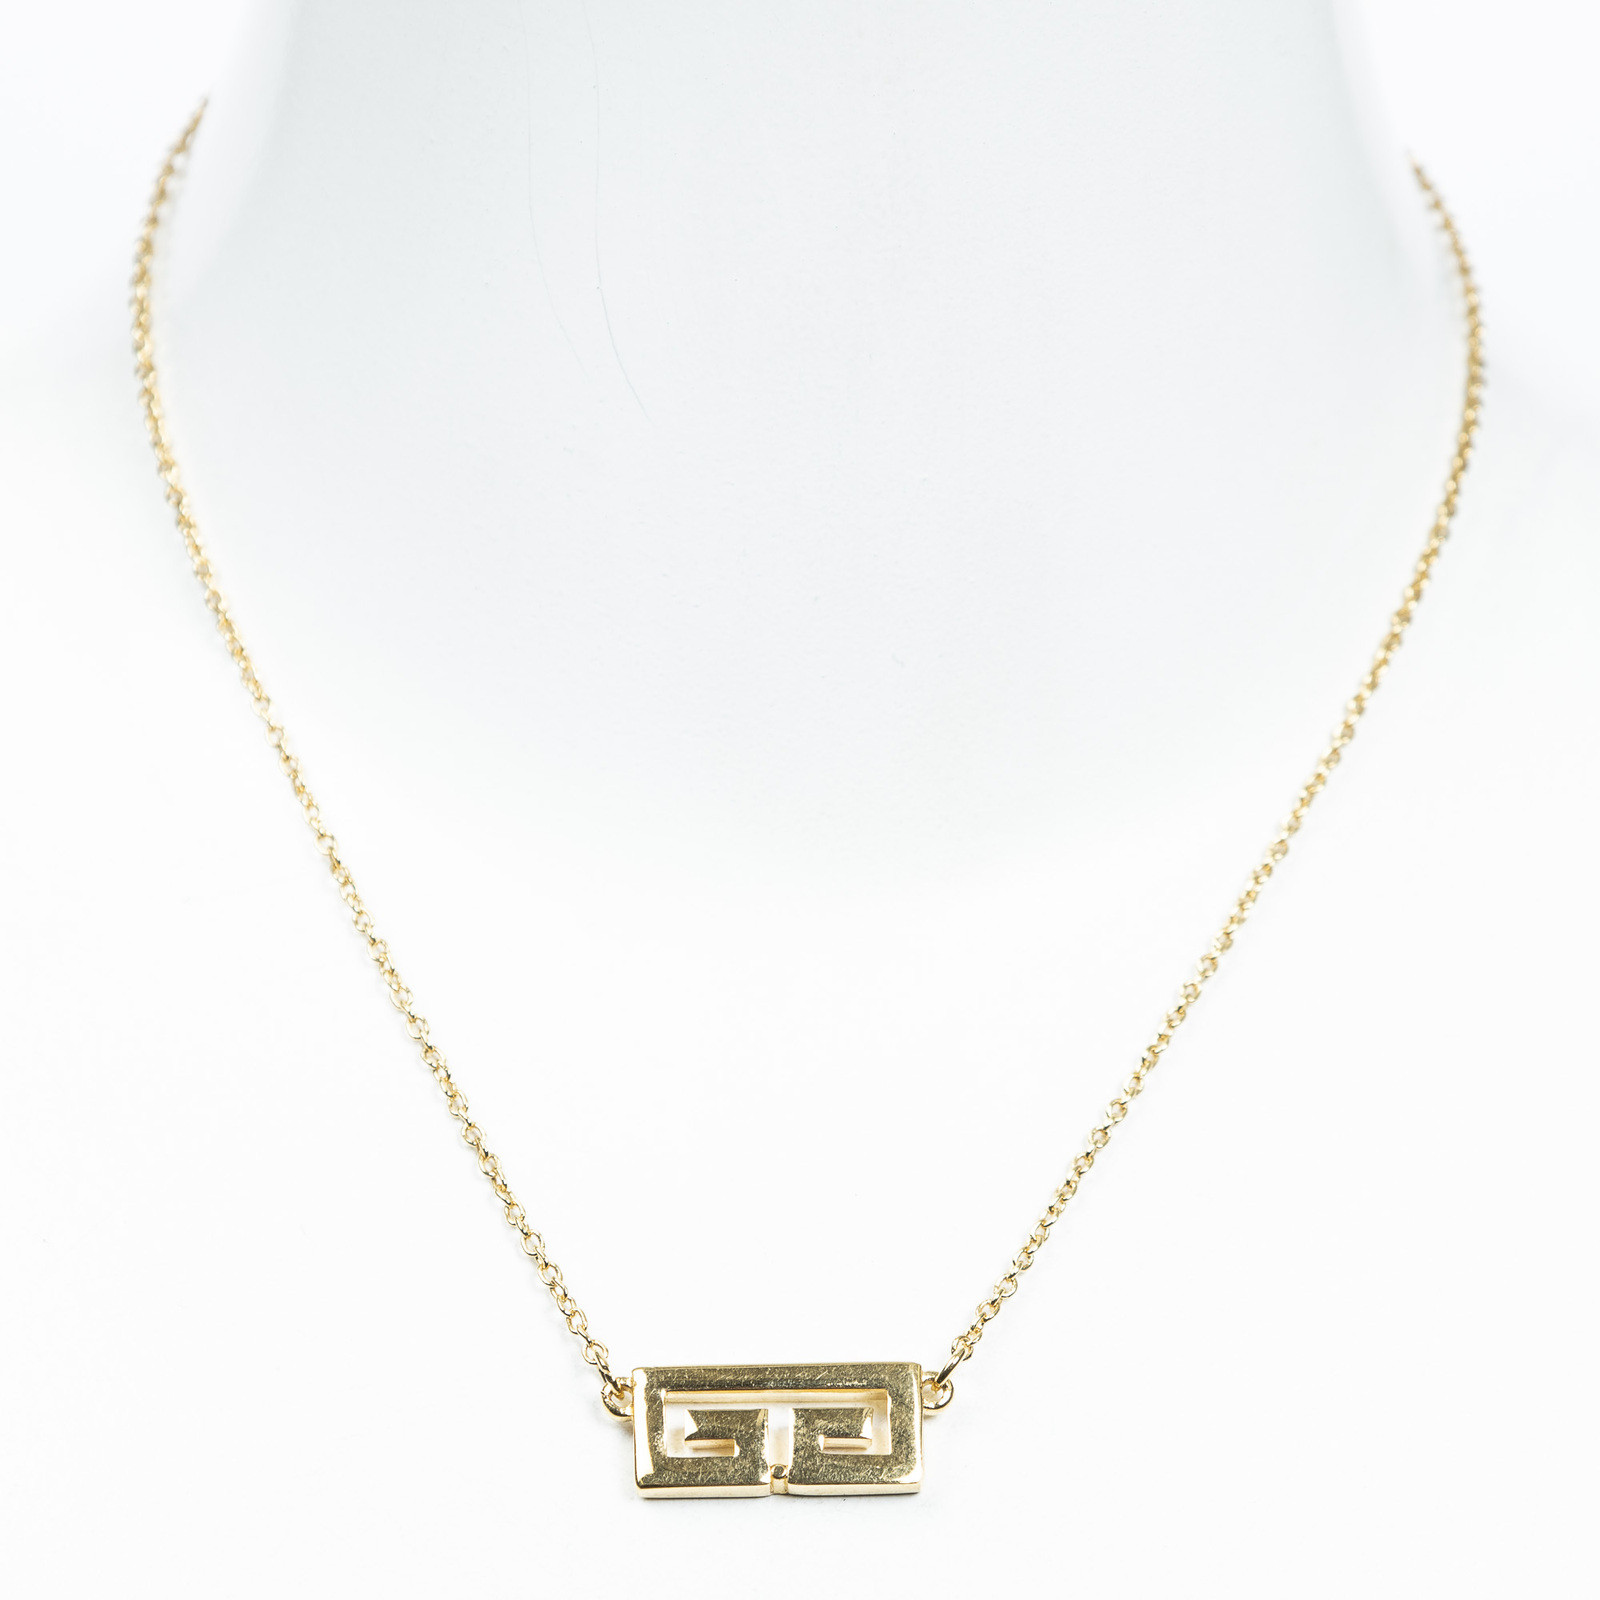 GIVENCHY Women's Kette in Gold | REBELLE